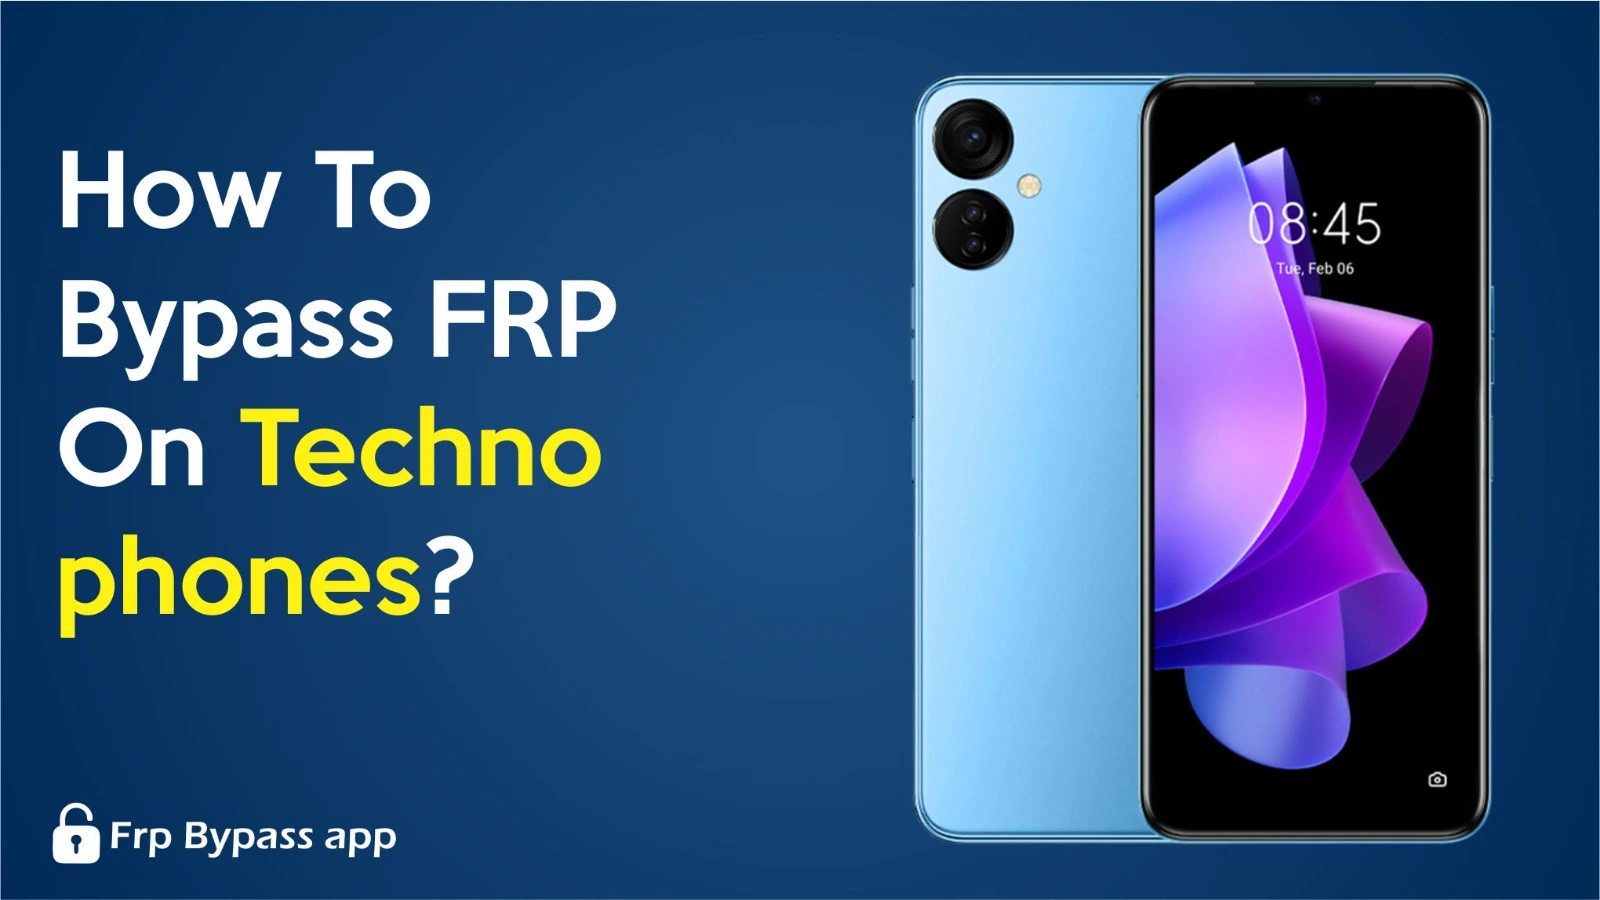 bypass frp on techno phones image